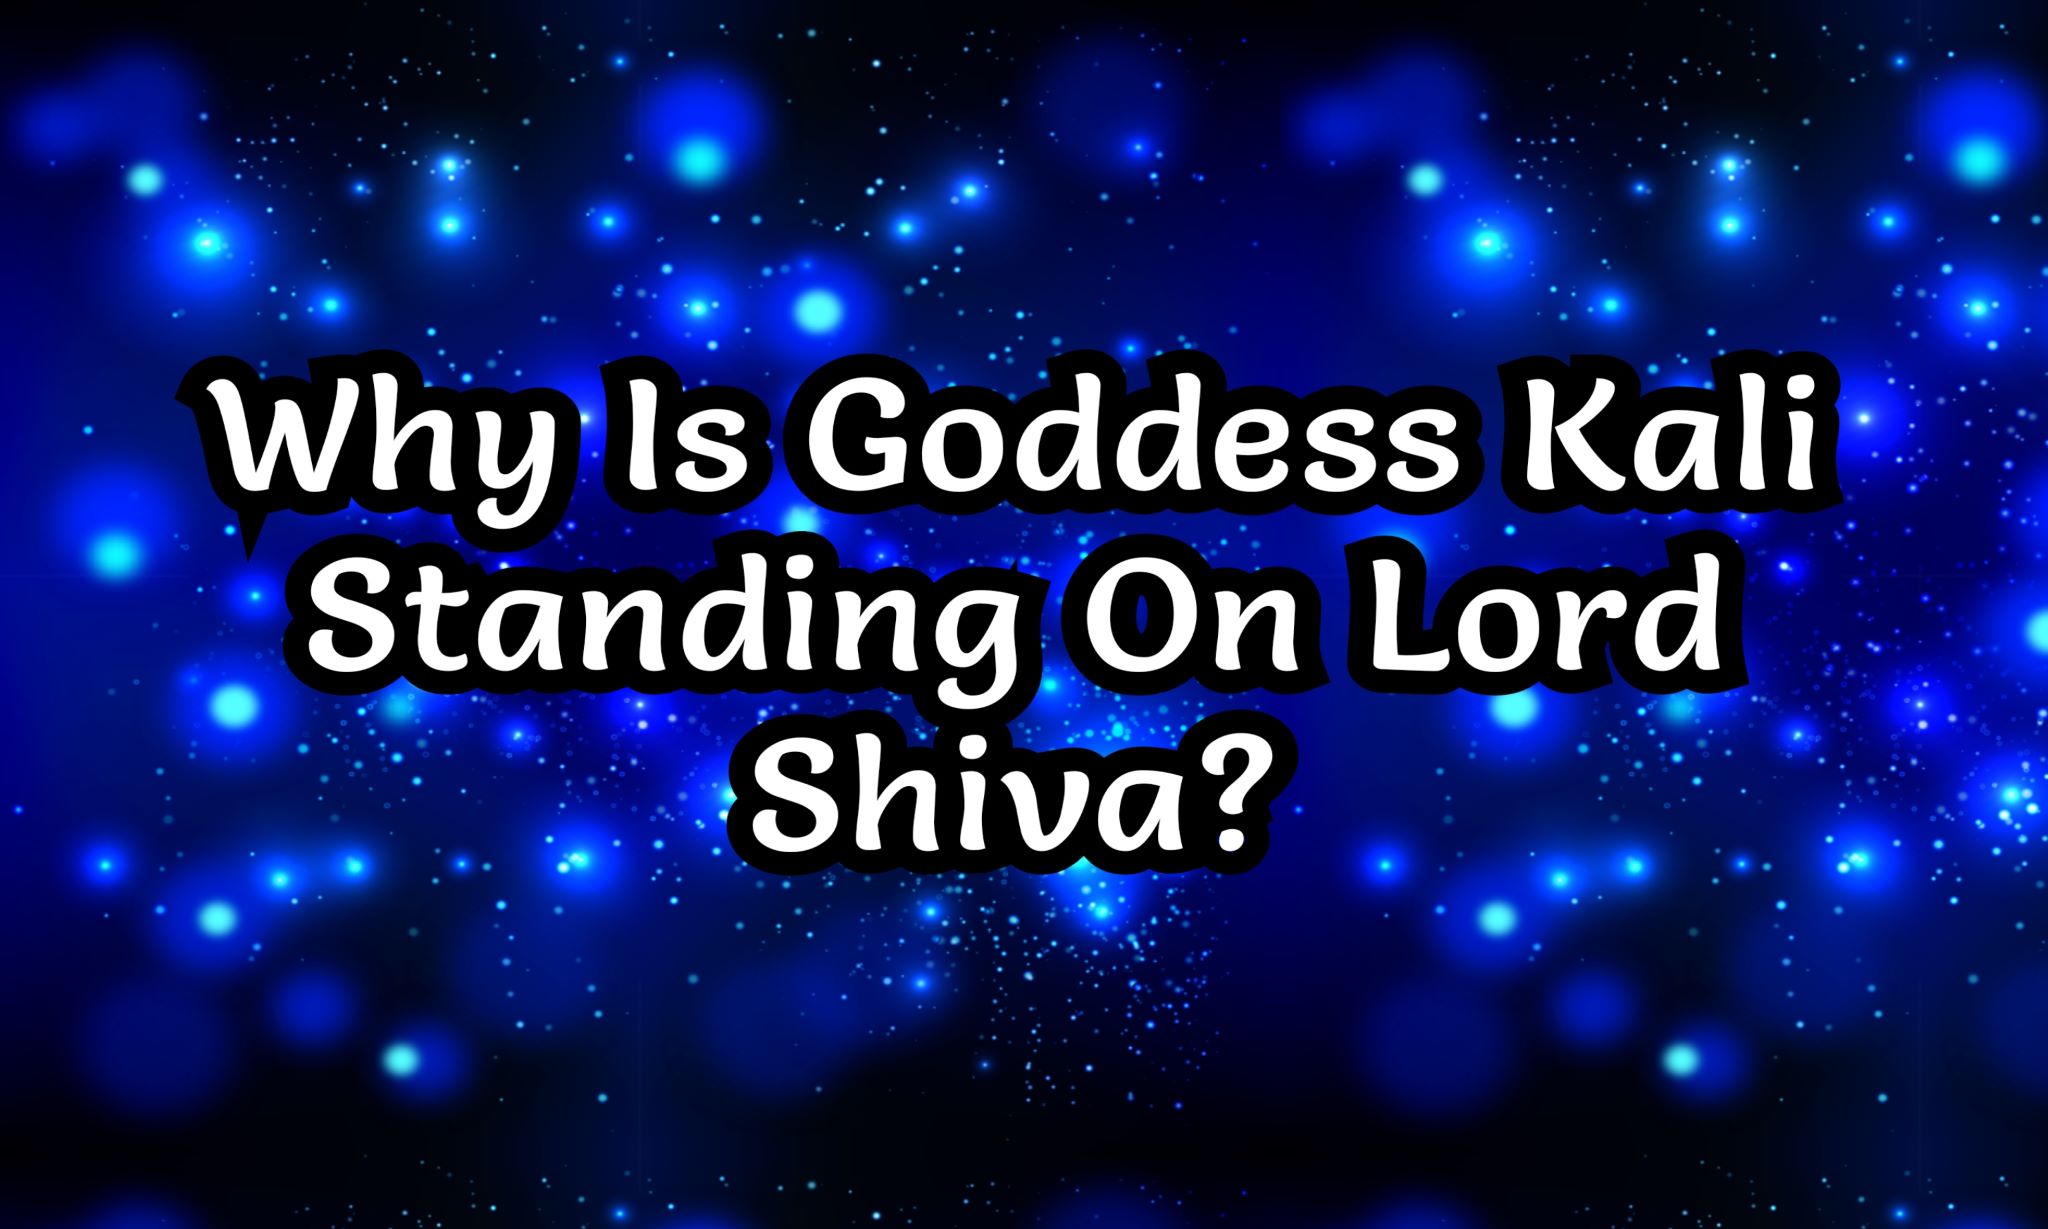 Why Is Goddess Kali Standing On Lord Shiva?